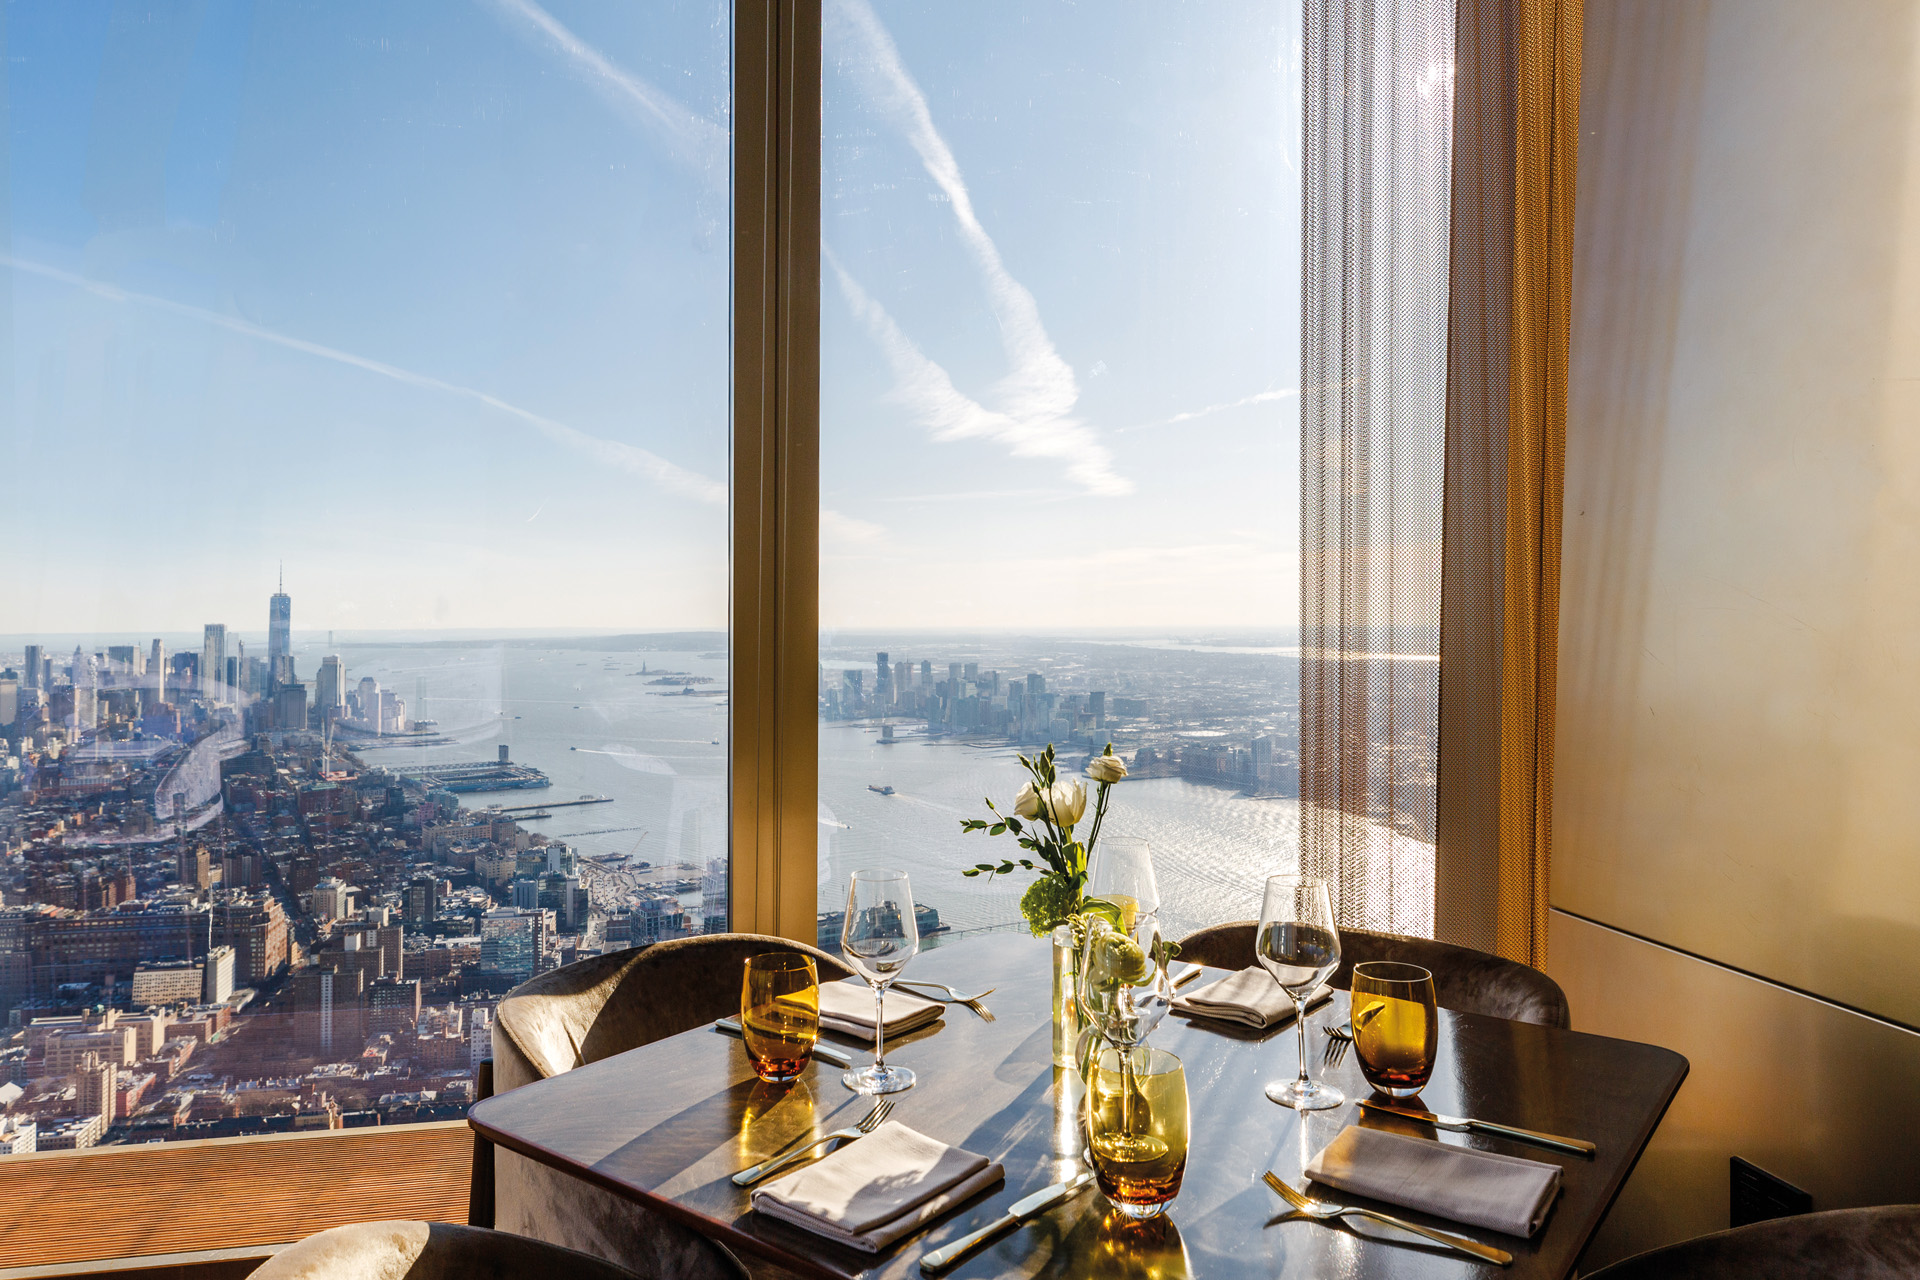 a layed table in front of panoramic window view over new york city